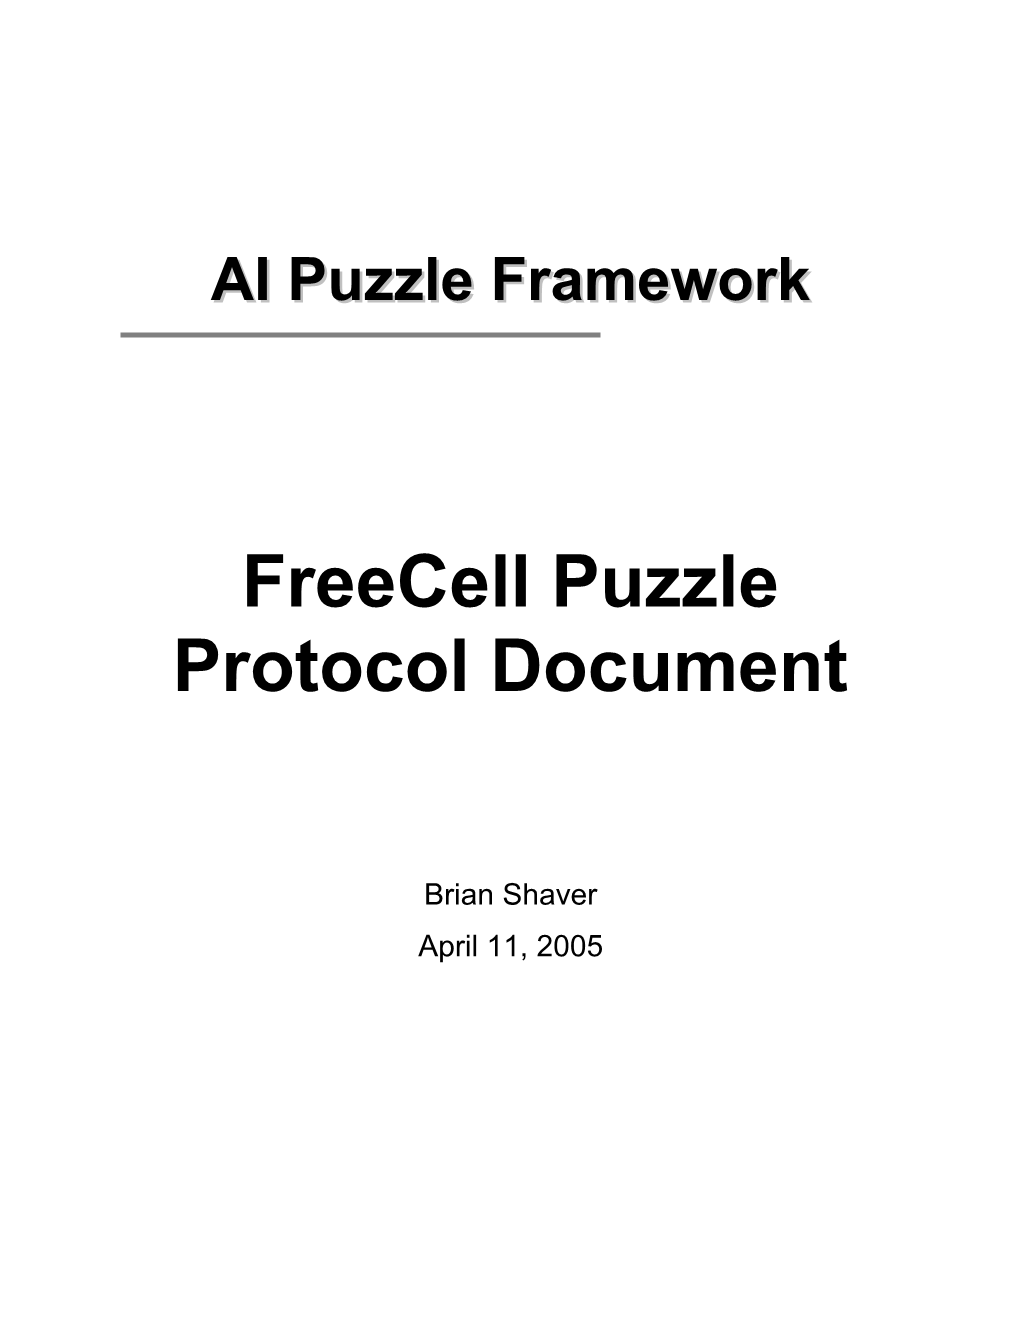 Freecell Puzzle Protocol Documentpage 1 of 7